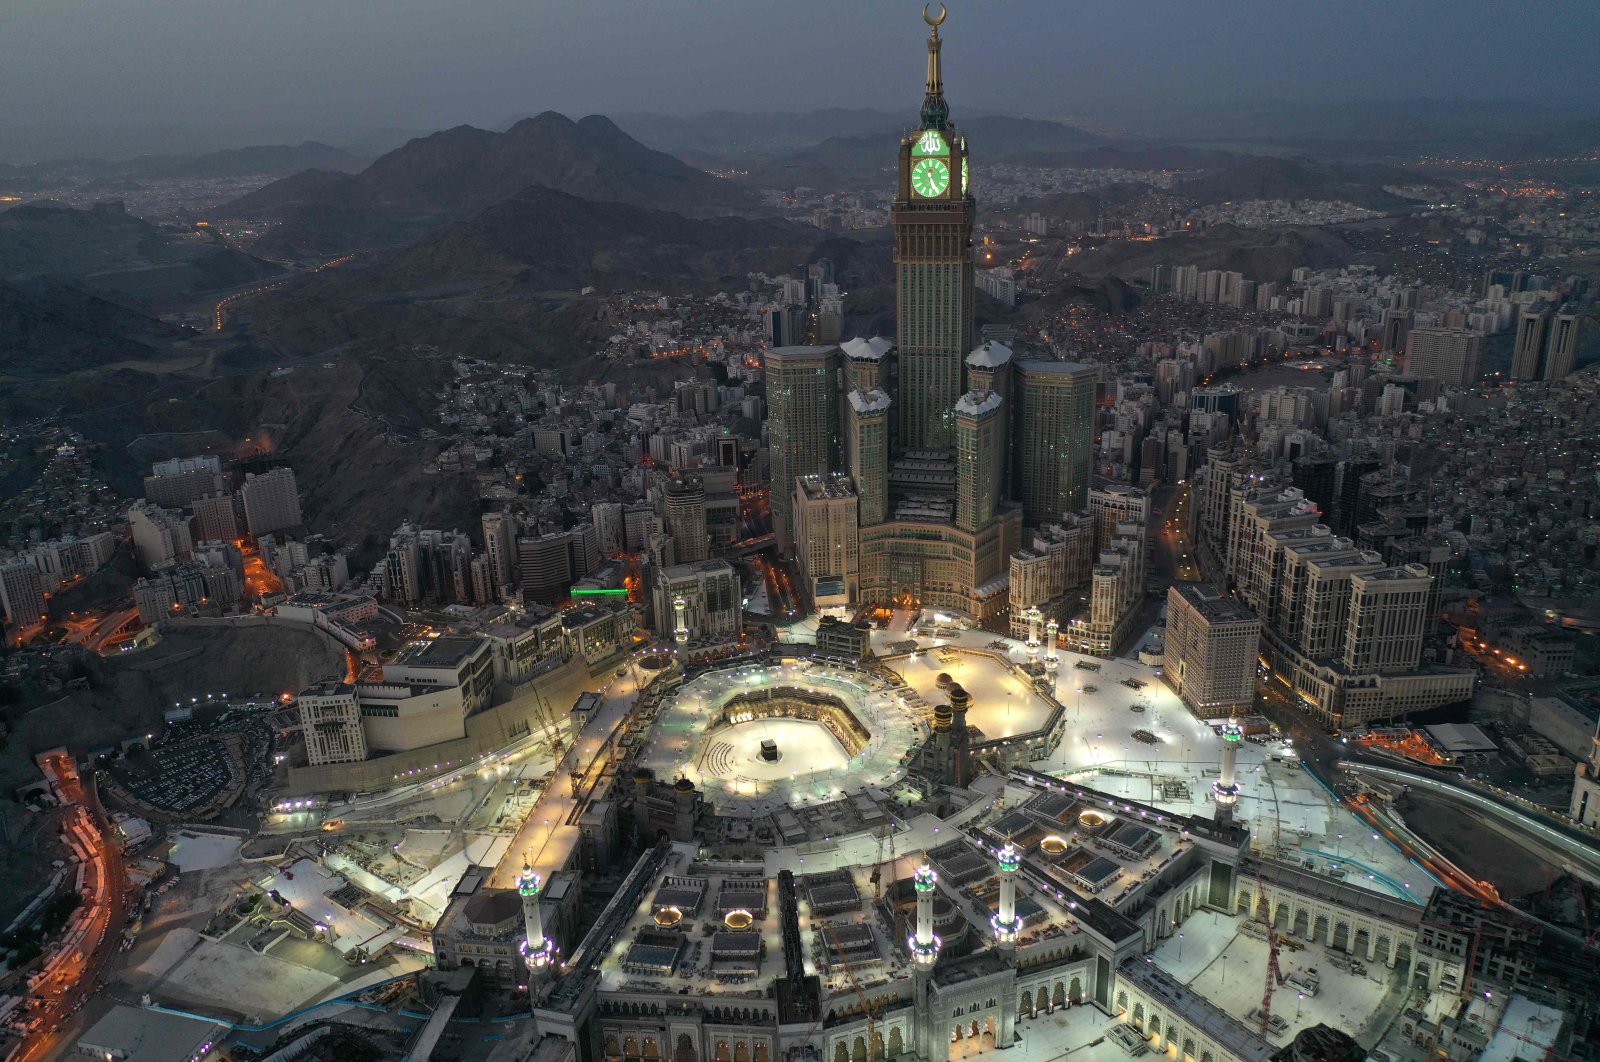 Mecca to allow entry from May 31 after 2-month coronavirus shutdown